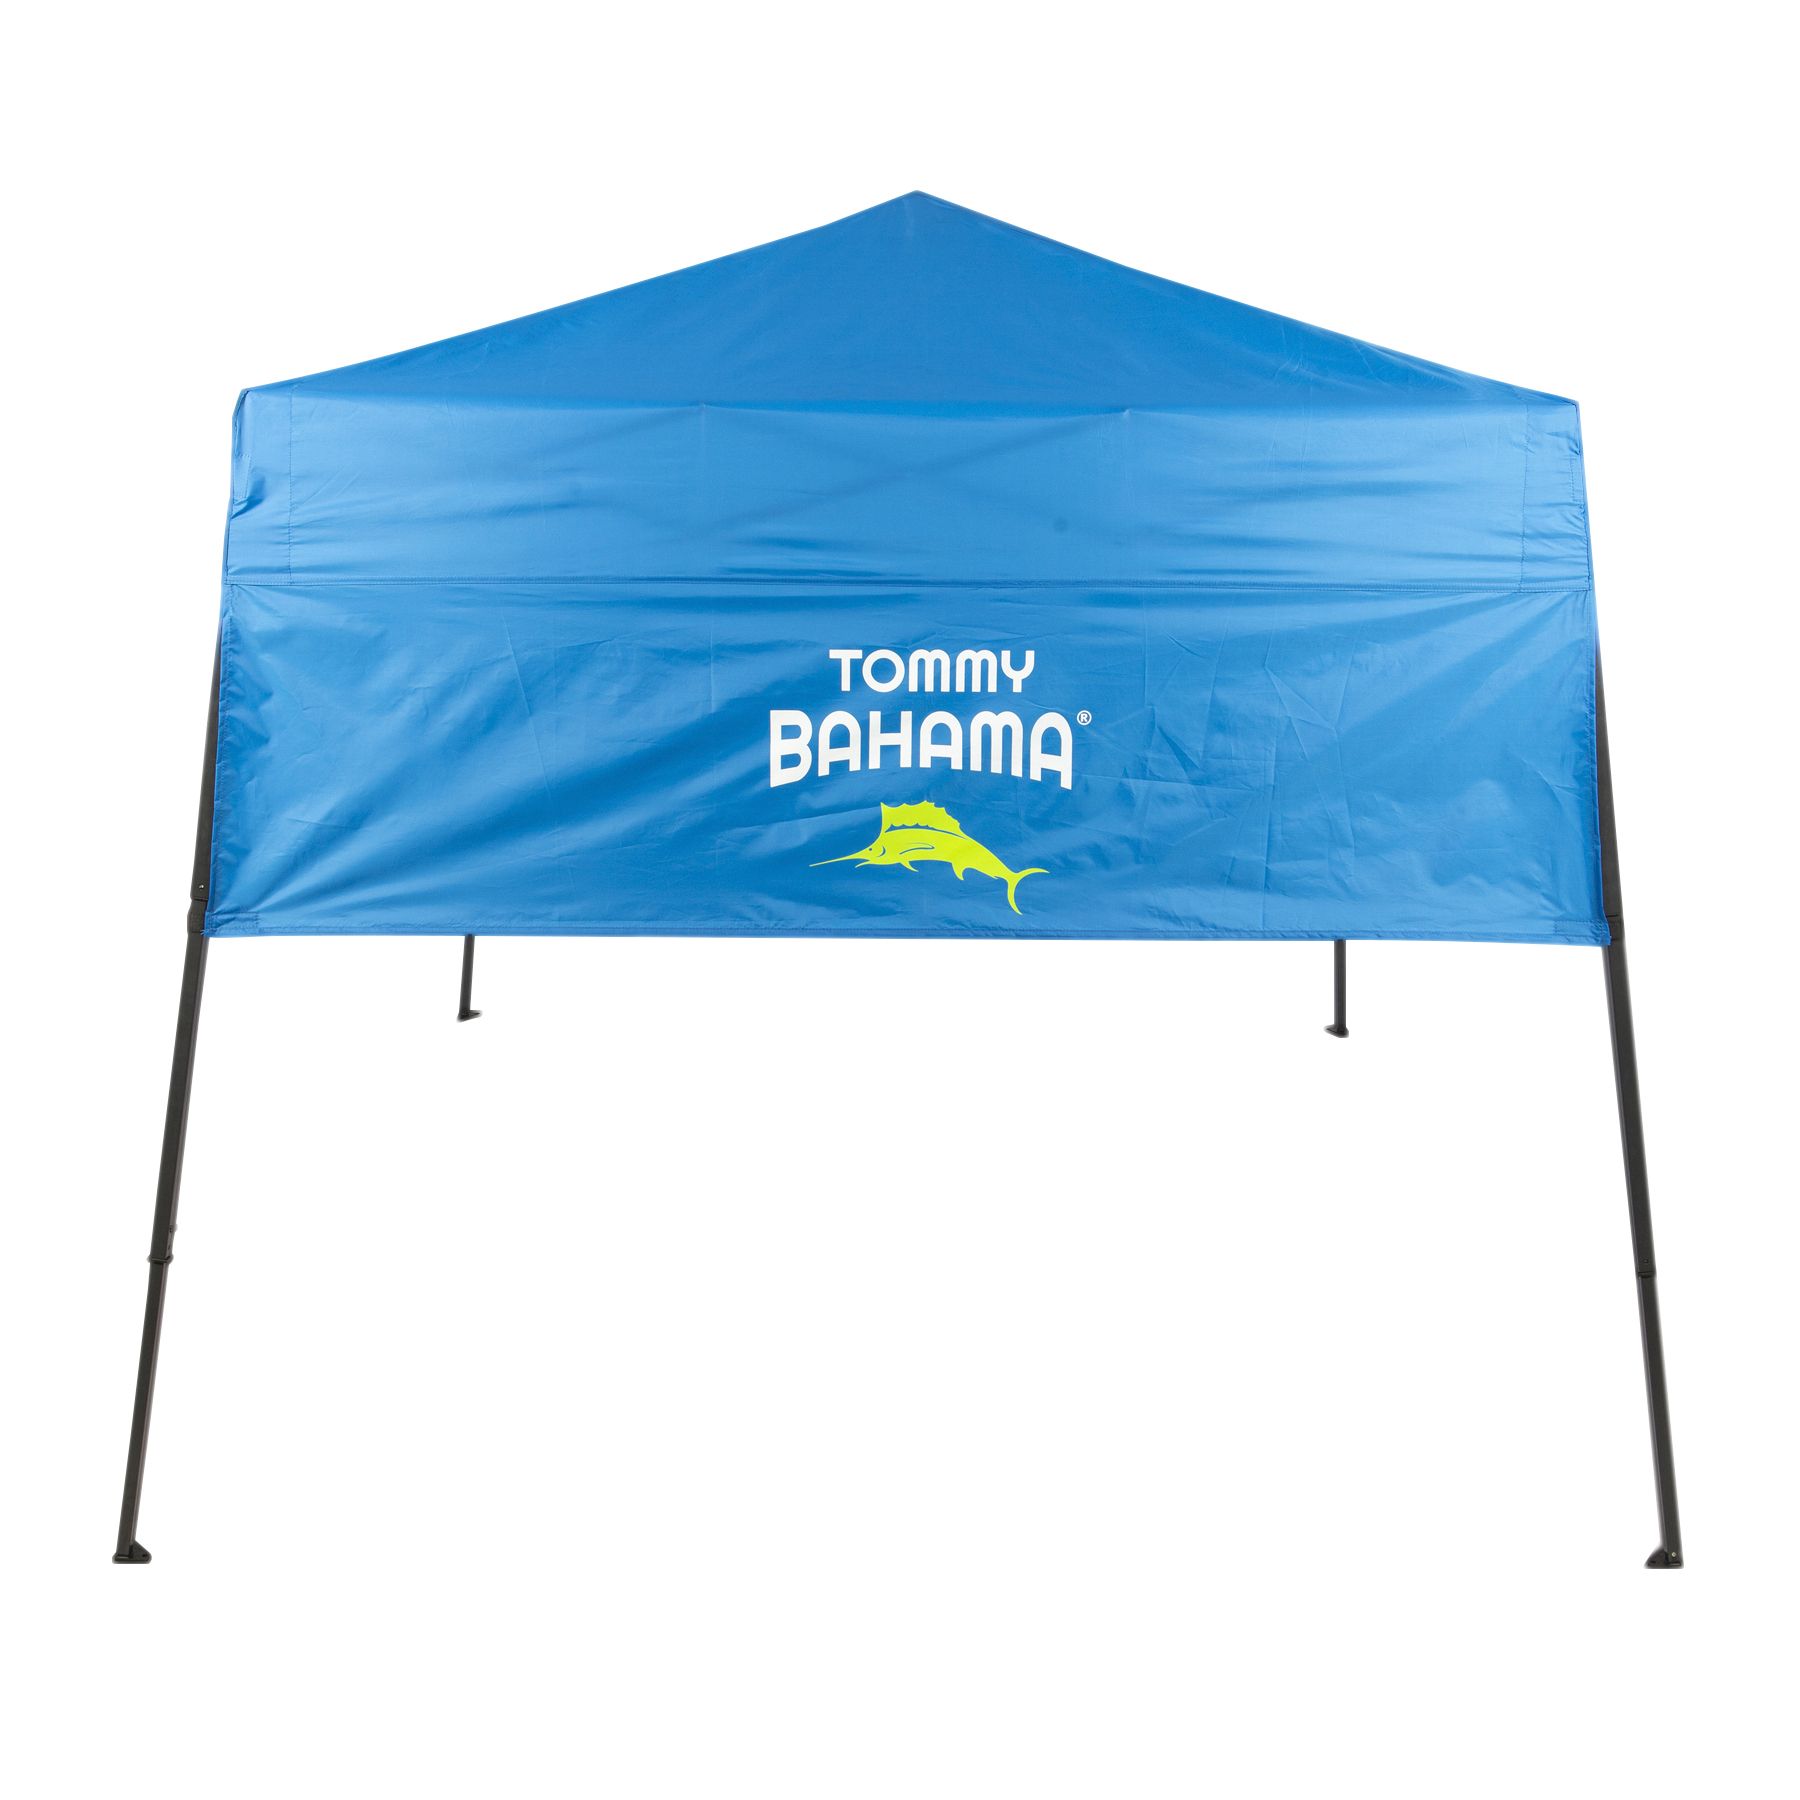 Tommy Bahama Go Easy 6' x 6' Pop-Up Canopy - Blue